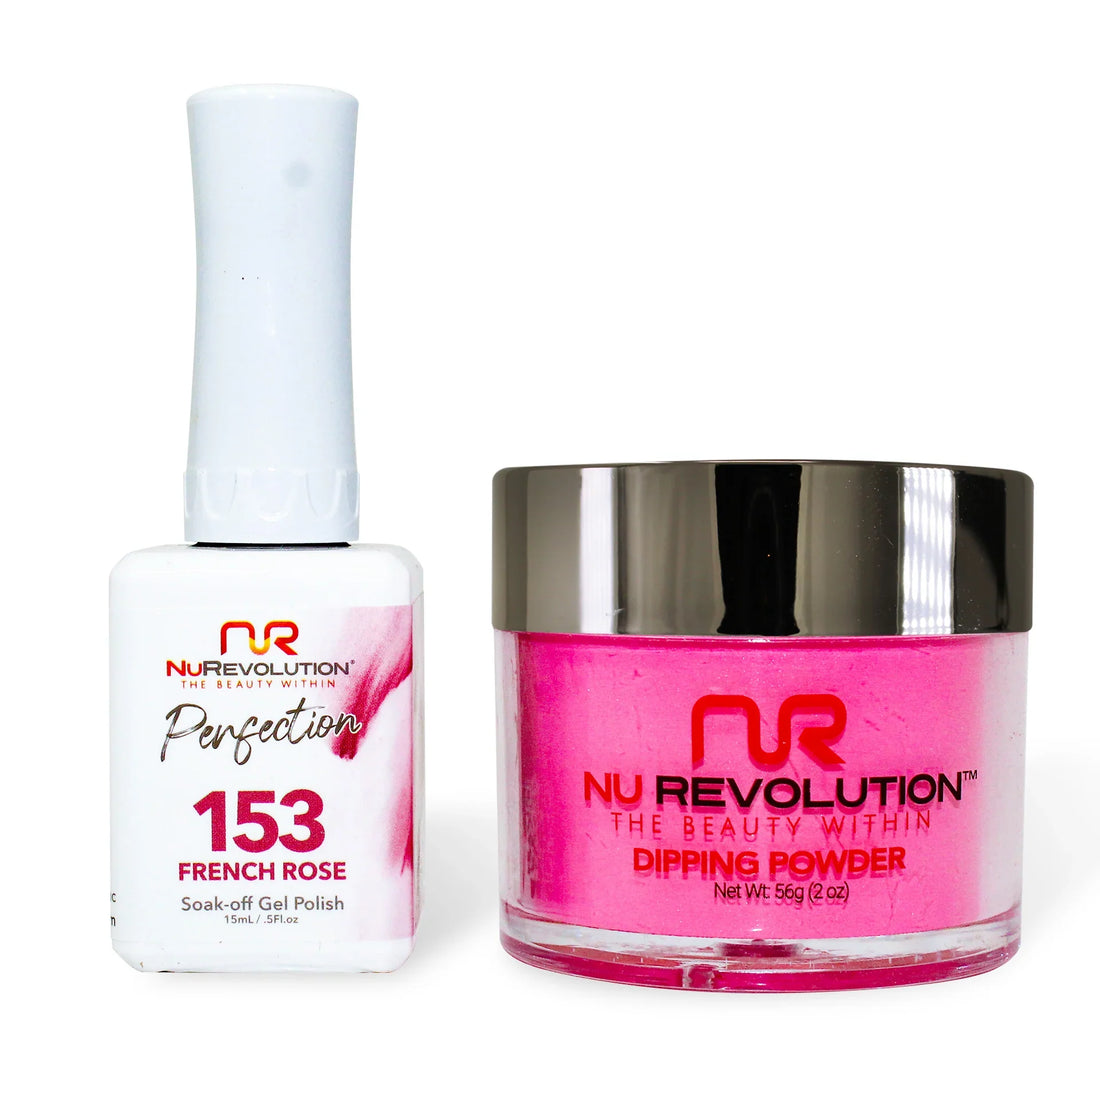 NuRevolution Perfection 153 French Rose